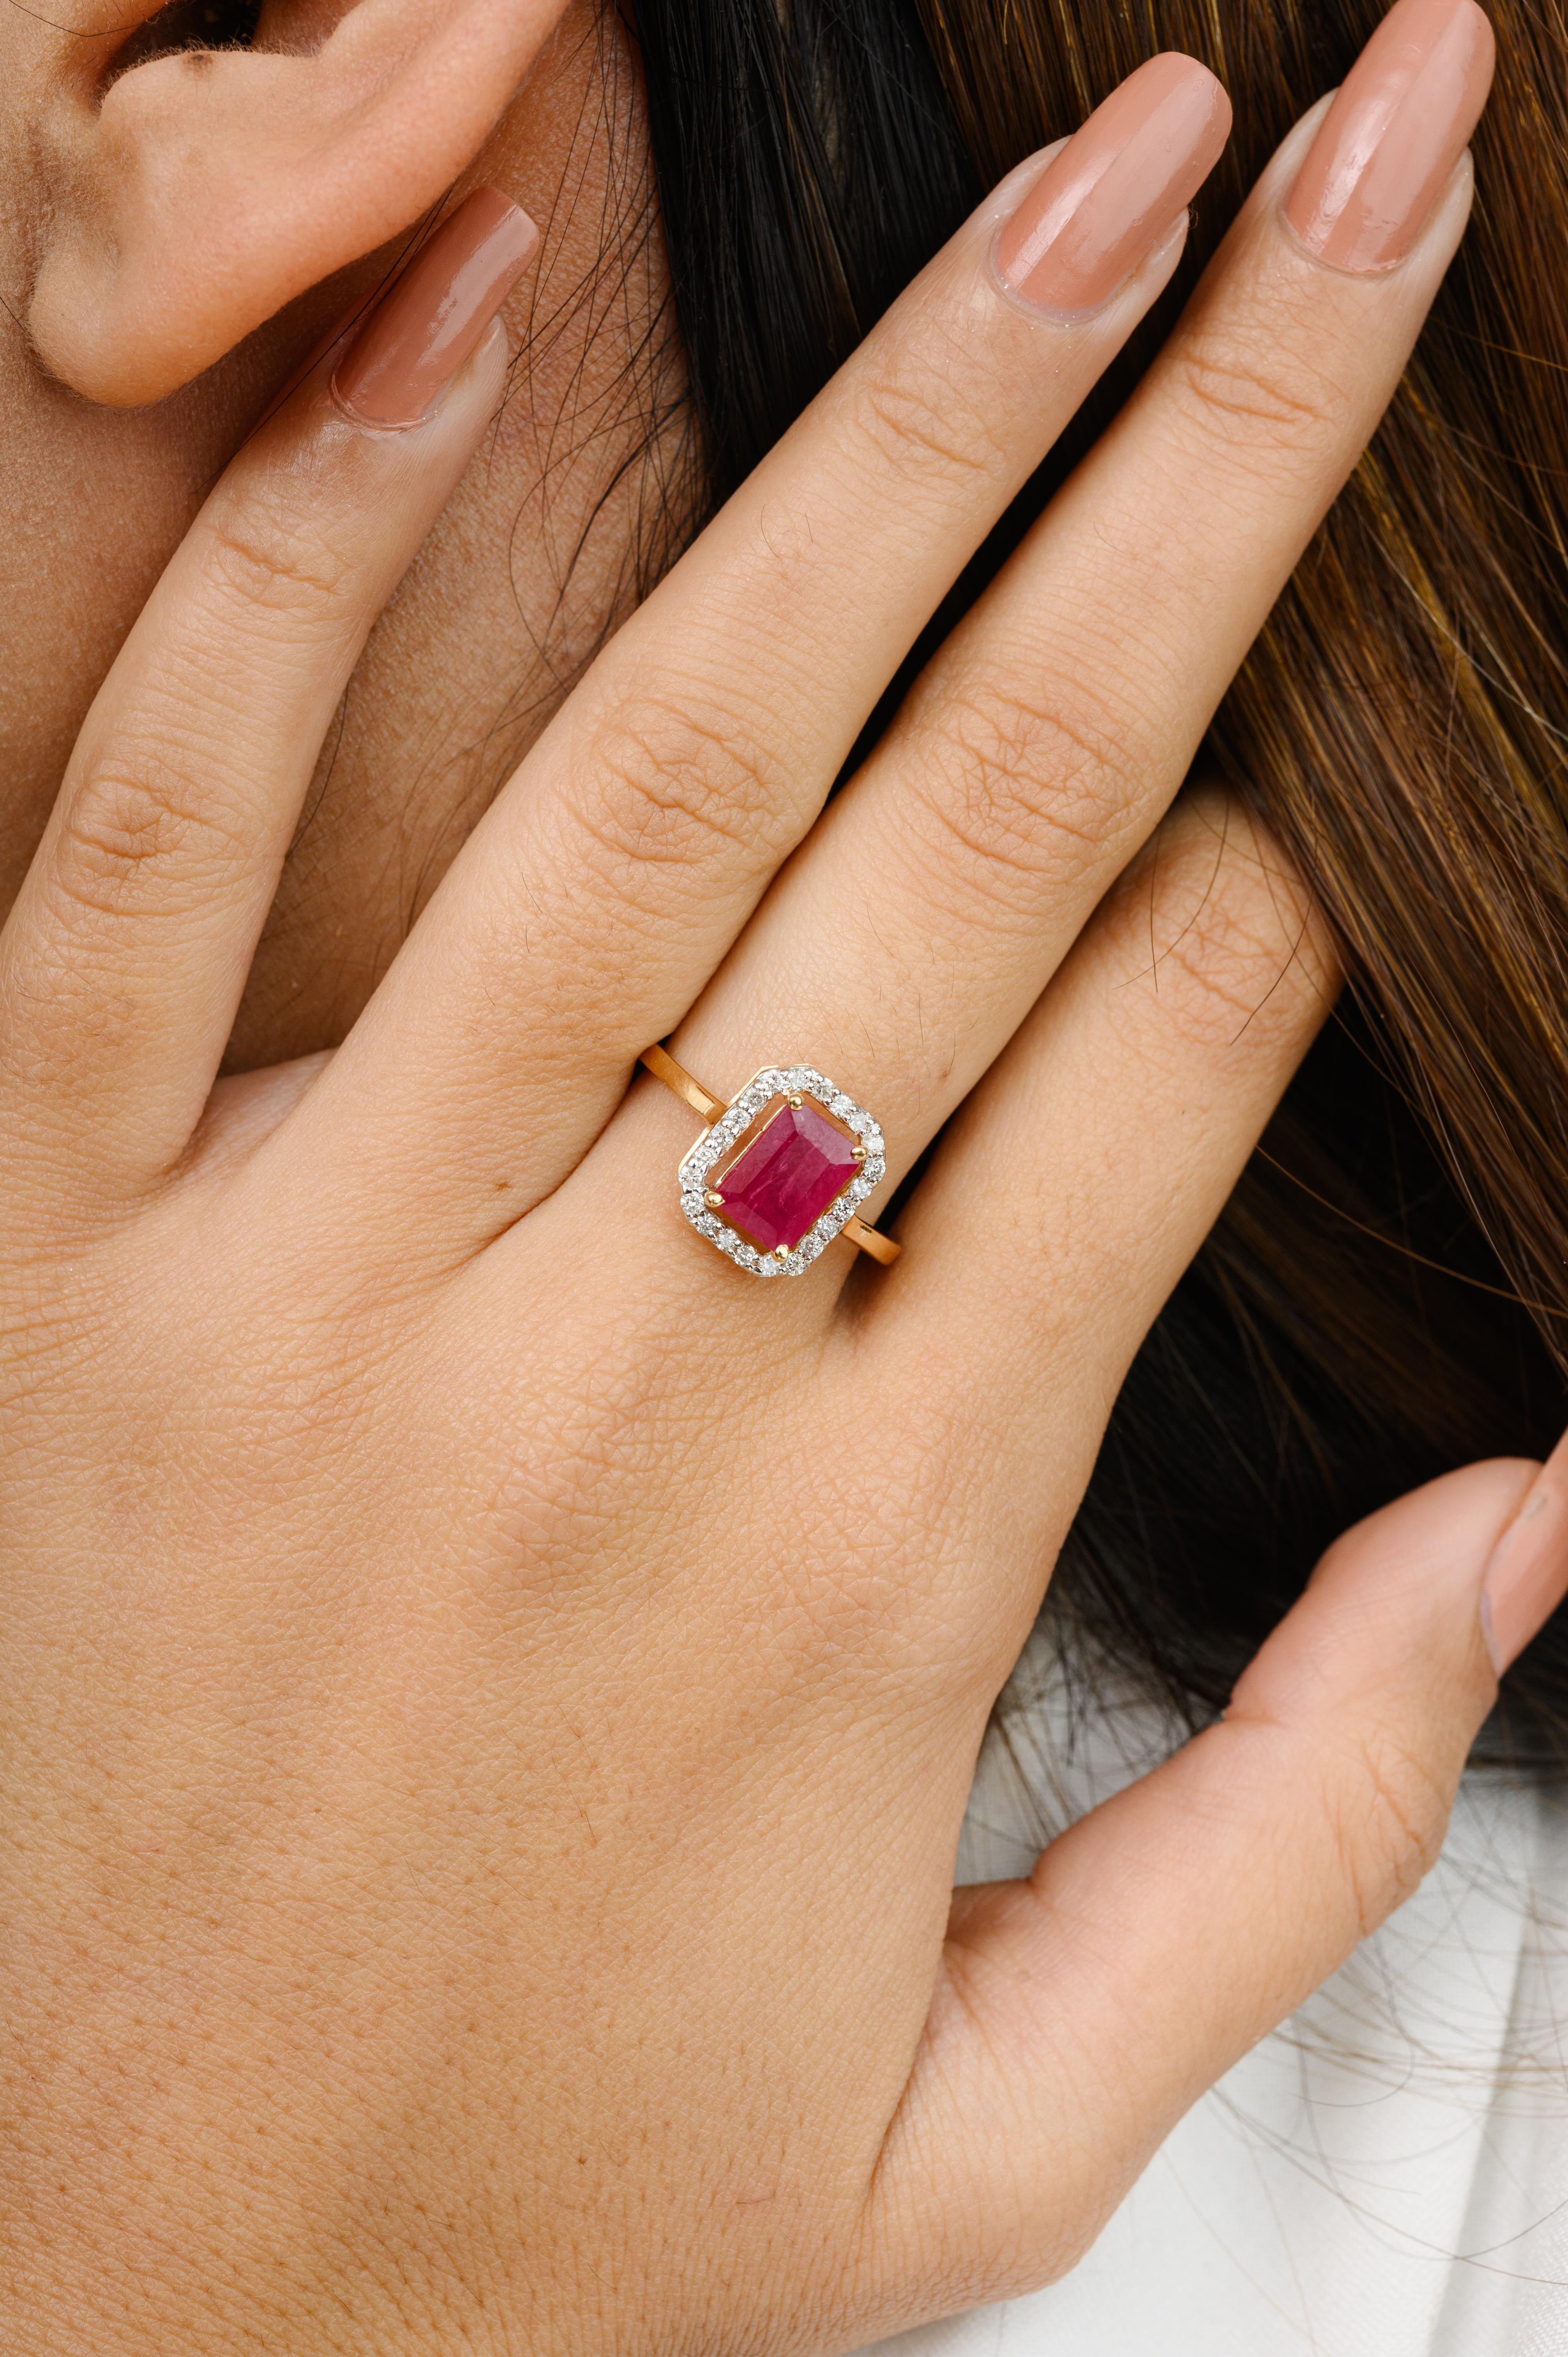 For Sale:  2.95 Carat Authentic Ruby Diamond Halo Engagement Ring in 18k Solid Yellow Gold 5